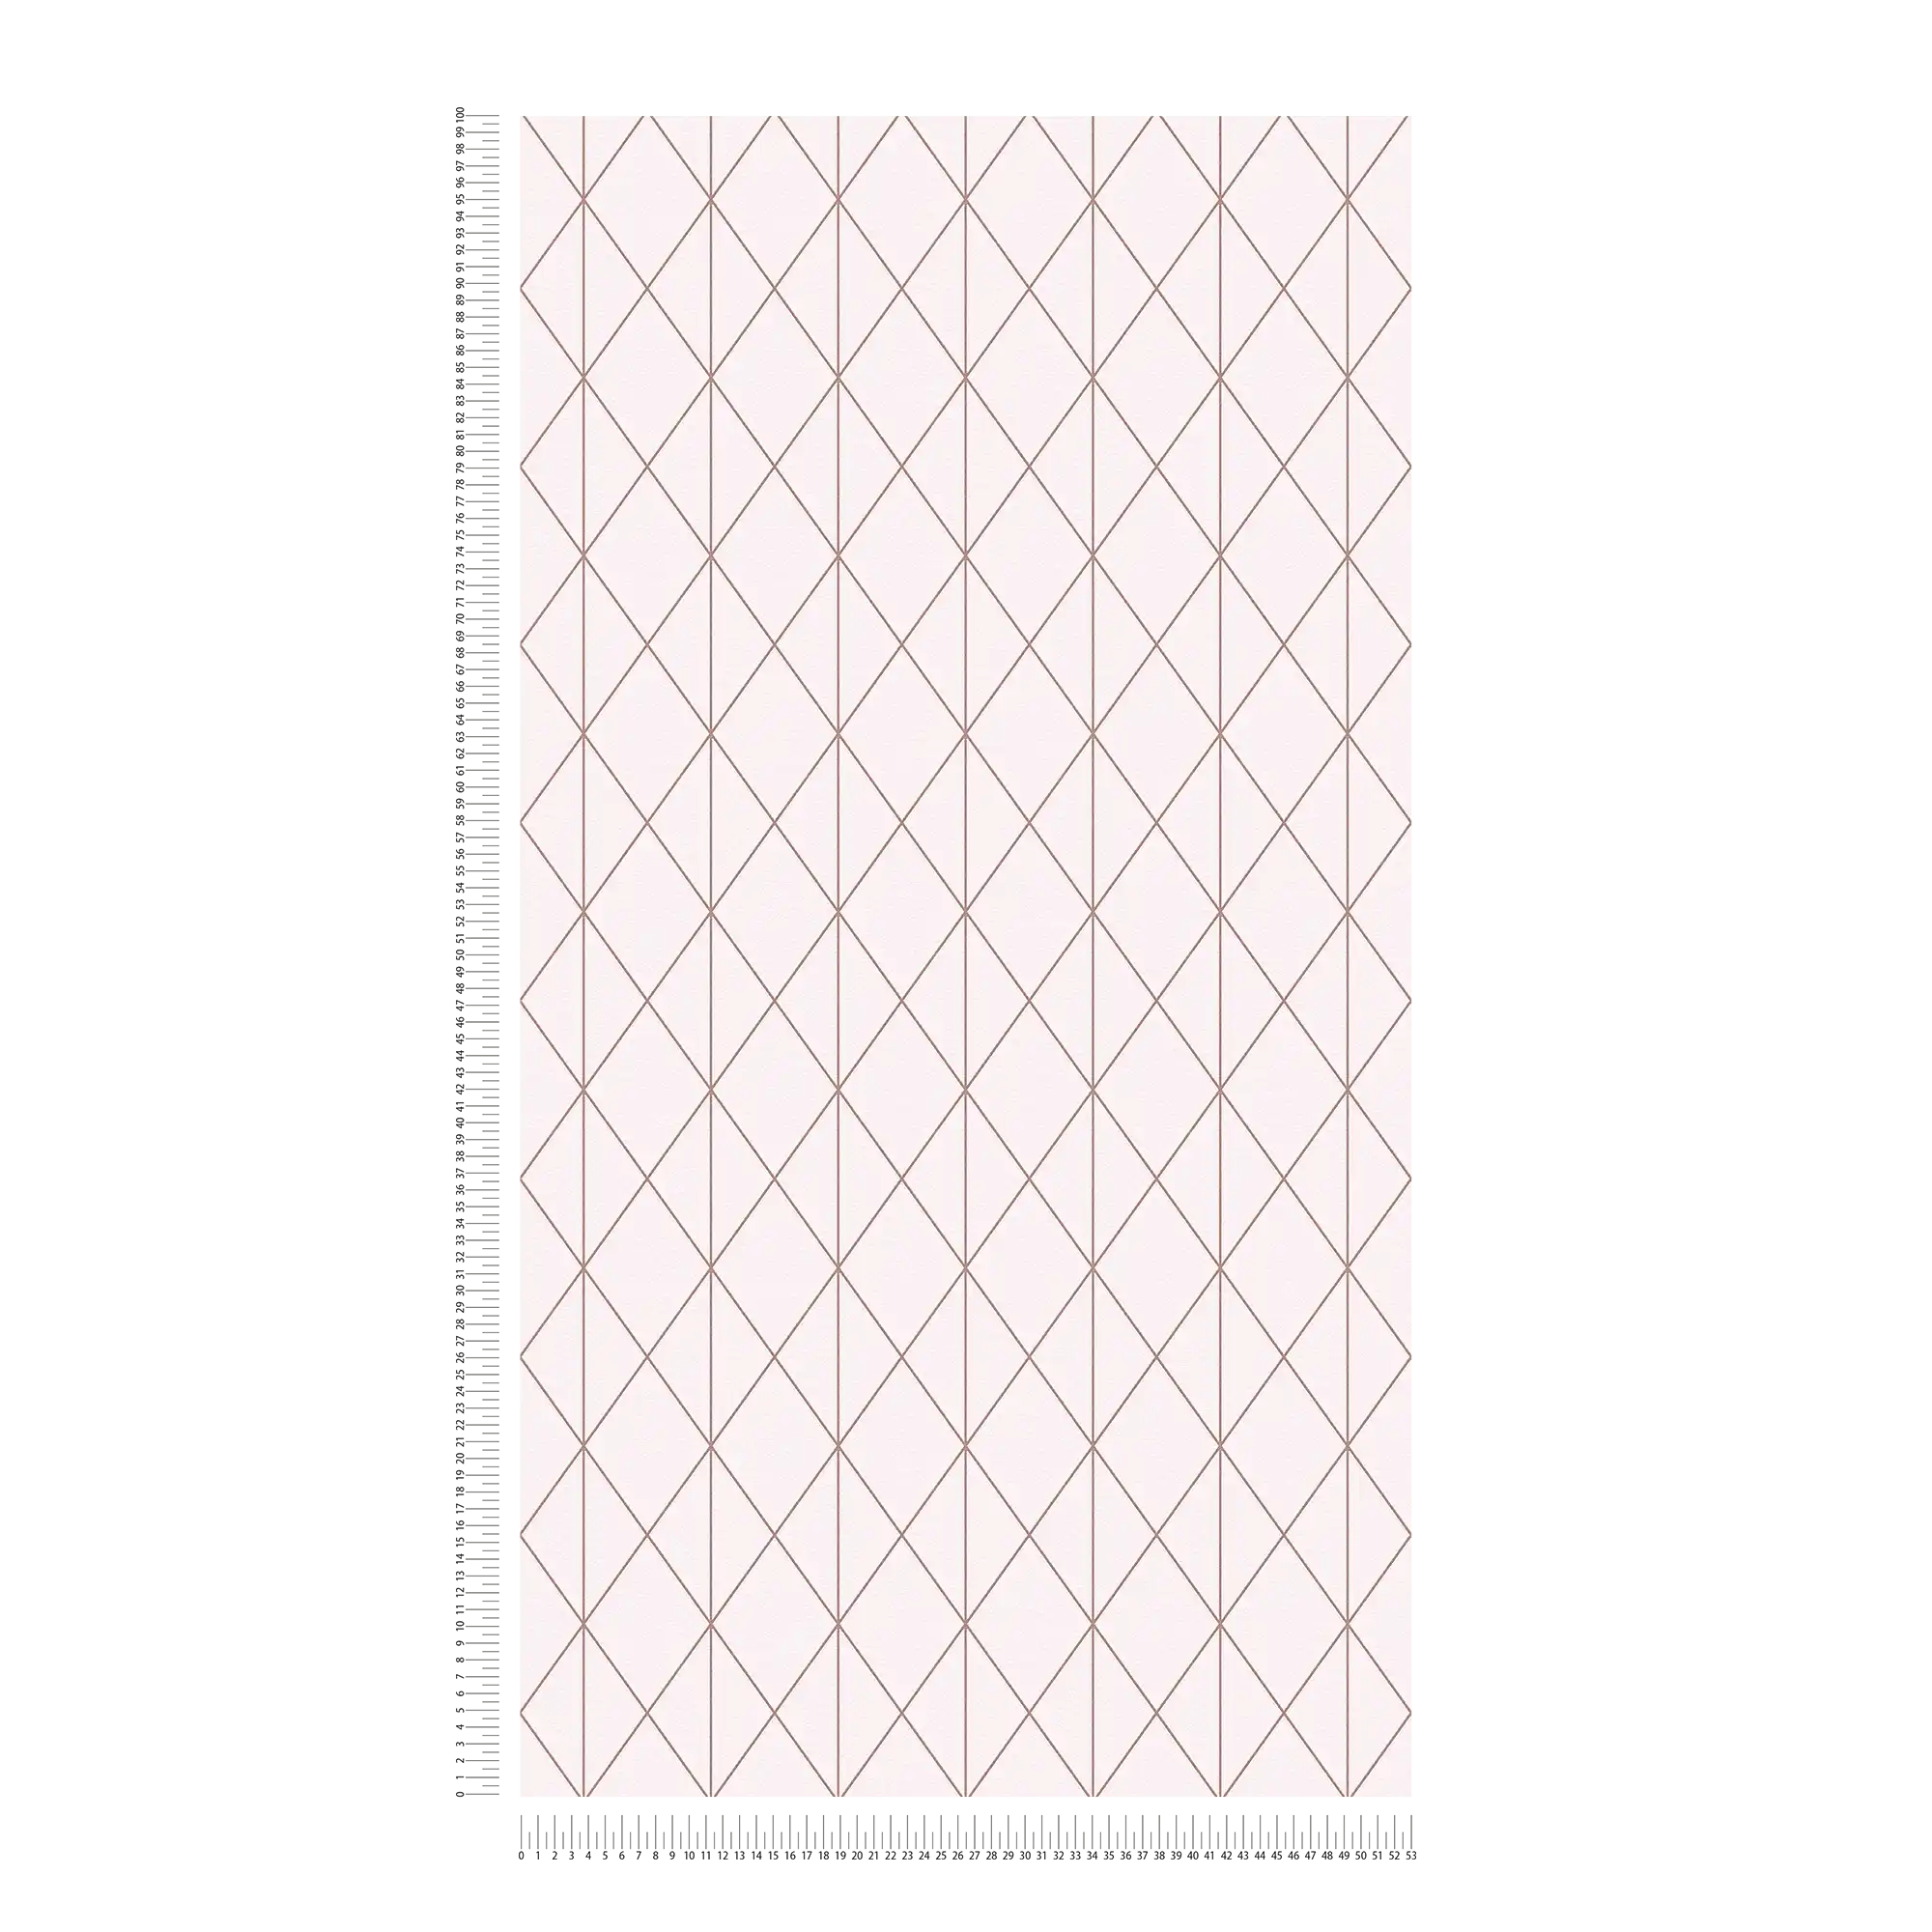             Graphic design wallpaper with metallic accent - pink
        